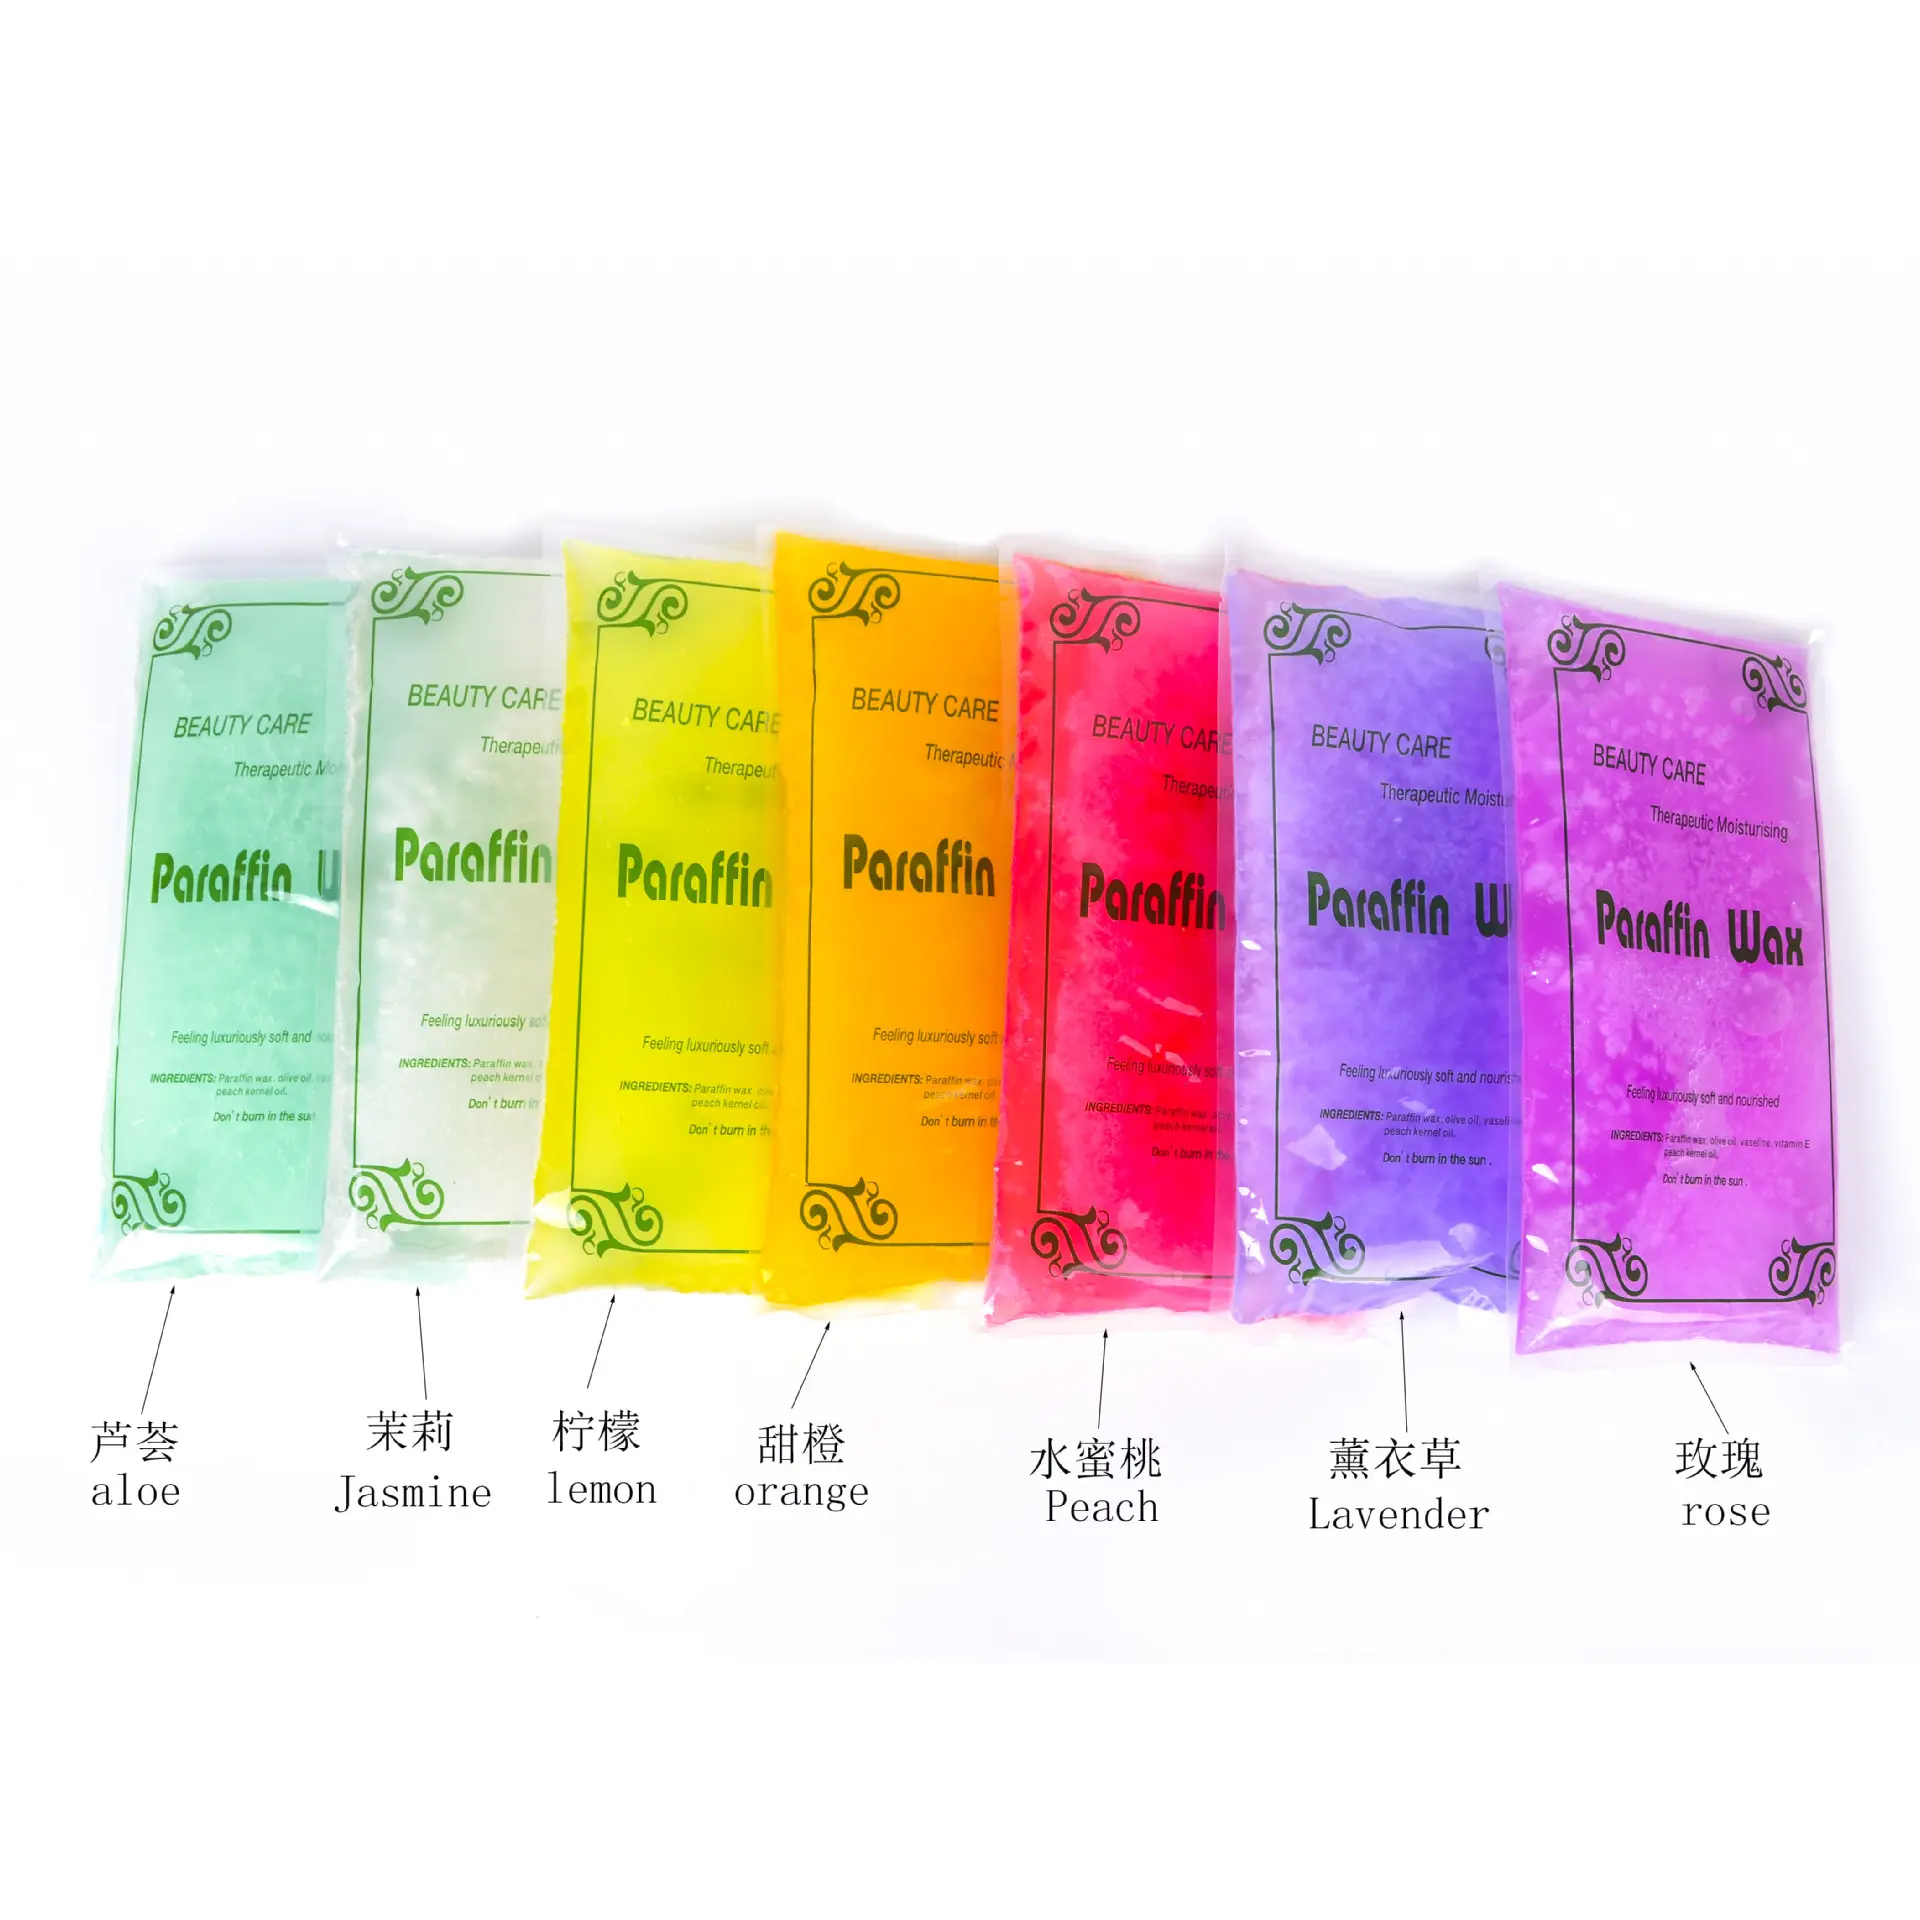 450g Hard Paraffin Wax Bar 7 Different Flavors Beauty Skin Care Therapeutic moisturizing Spa Tools